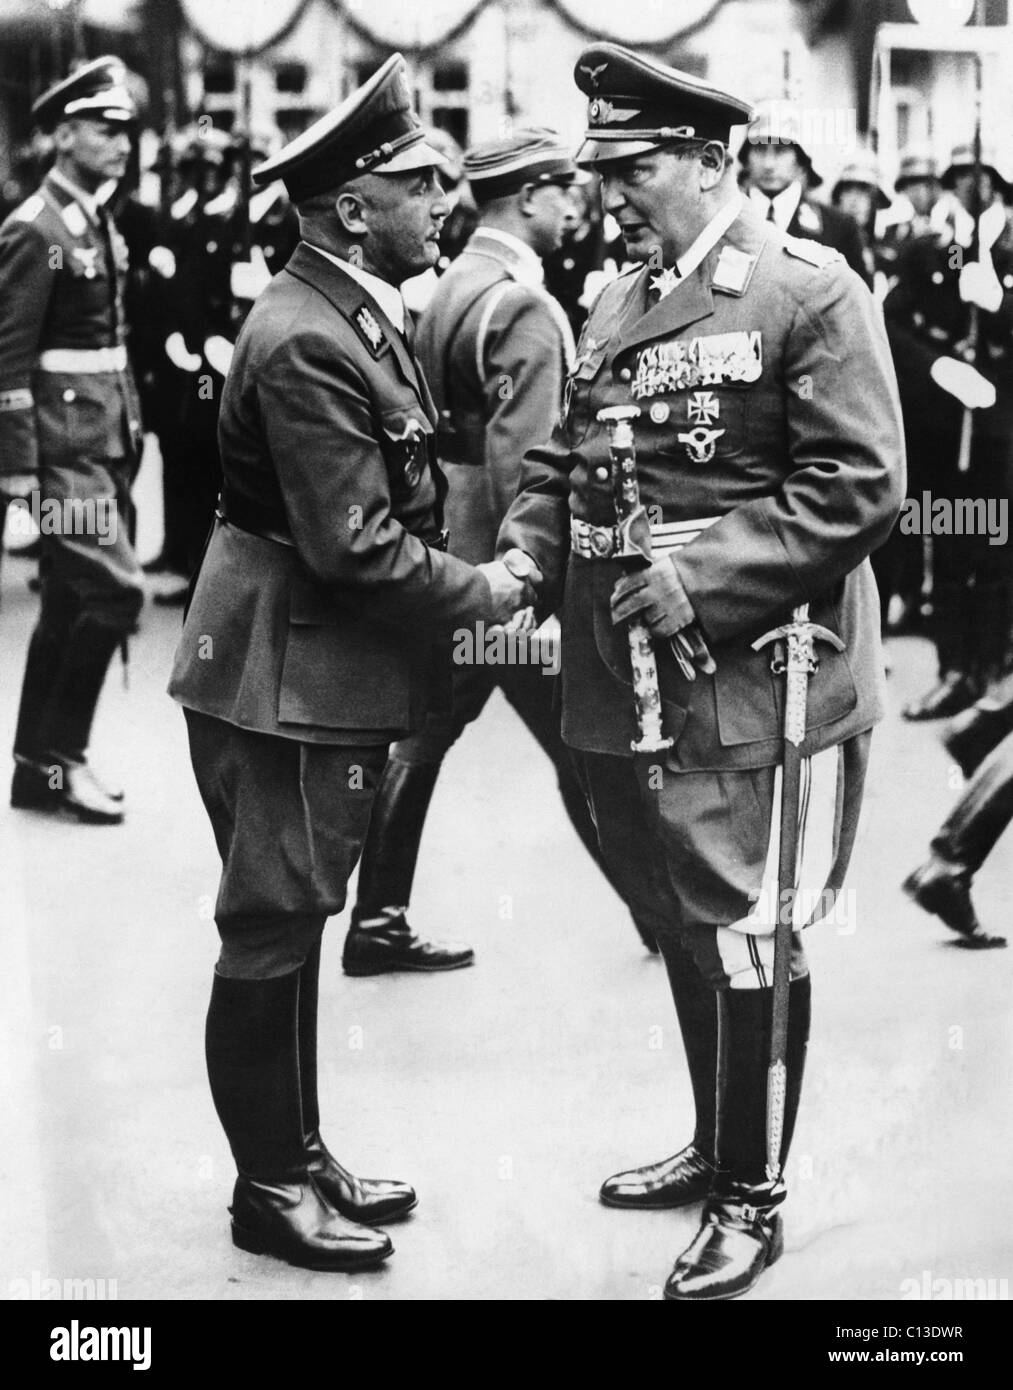 From left, publisher of Der Stuermer Julius Streicher, commander-in-chief of the Luftwaffe Hermann Goering, at the 10th Nazi Party Congress, Nuremberg, 1938 Stock Photo